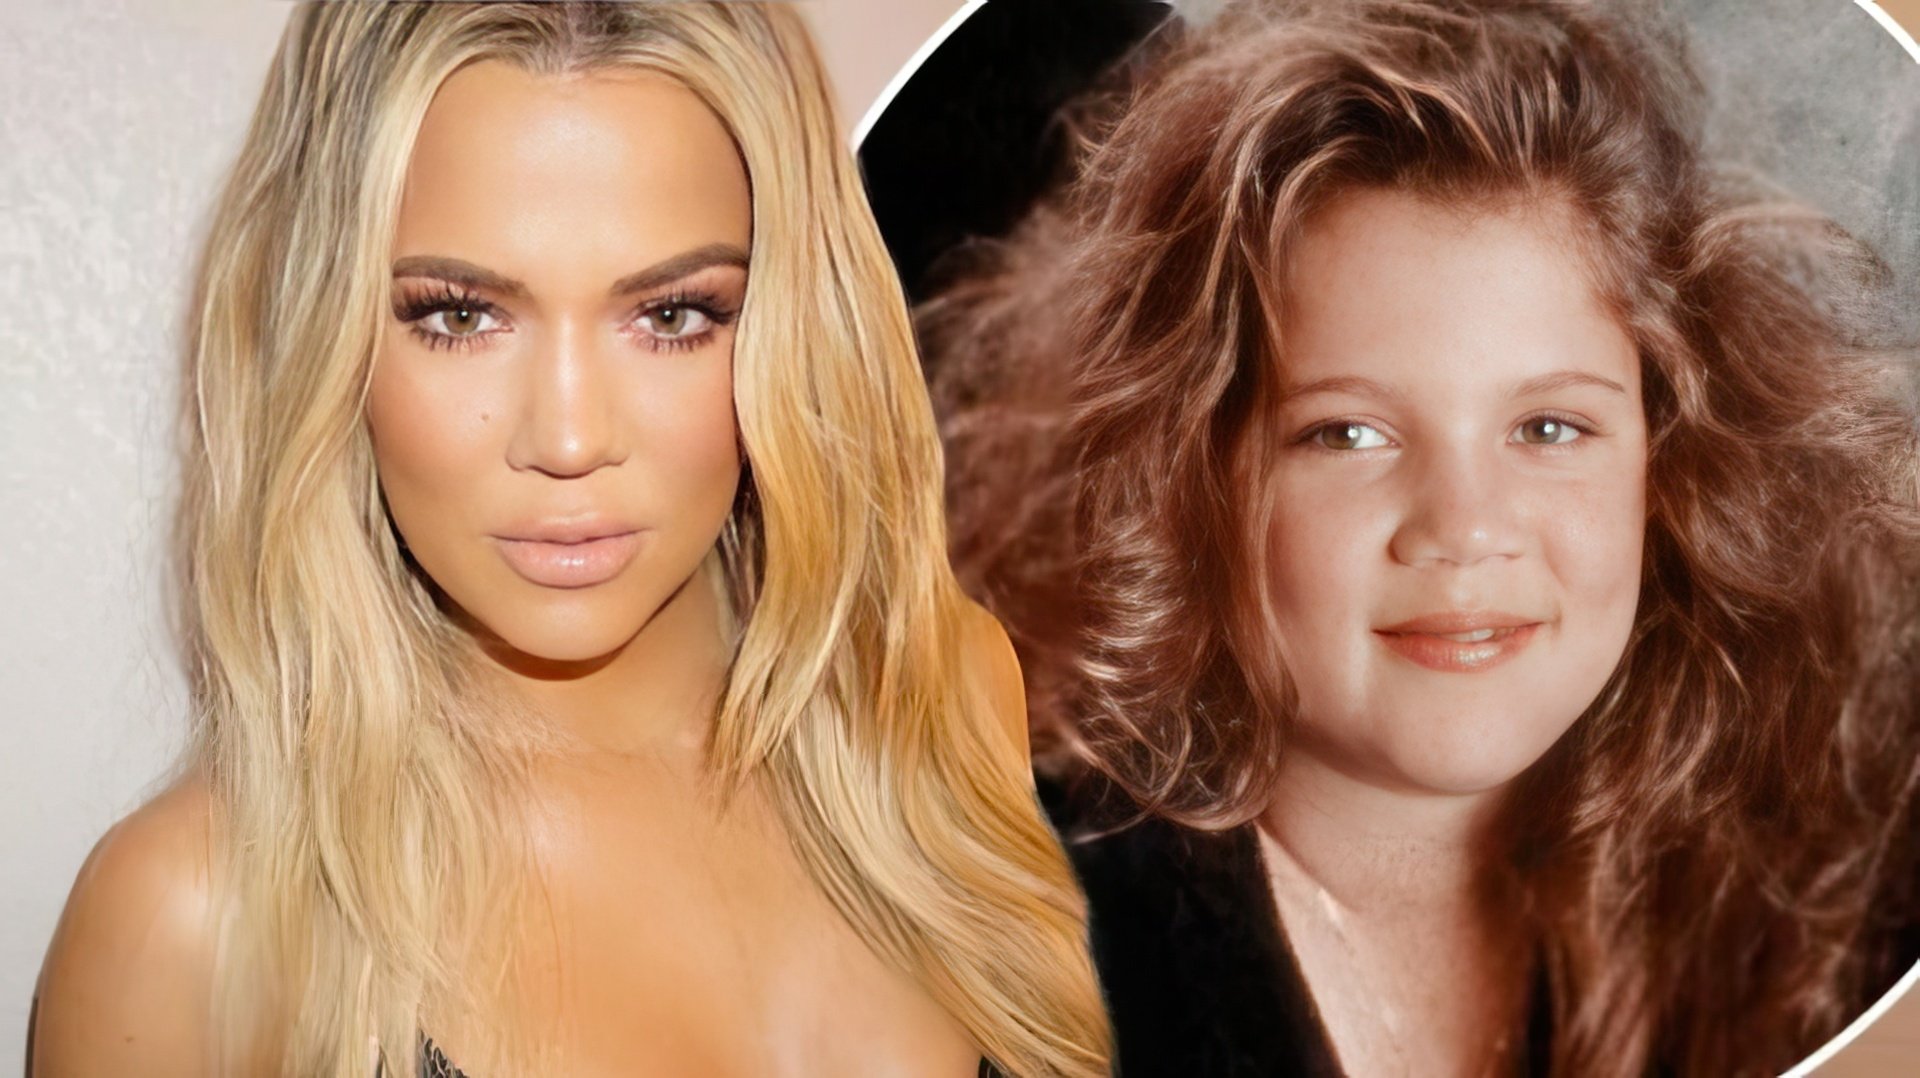 Khloé really struggled with her weight when she was younger